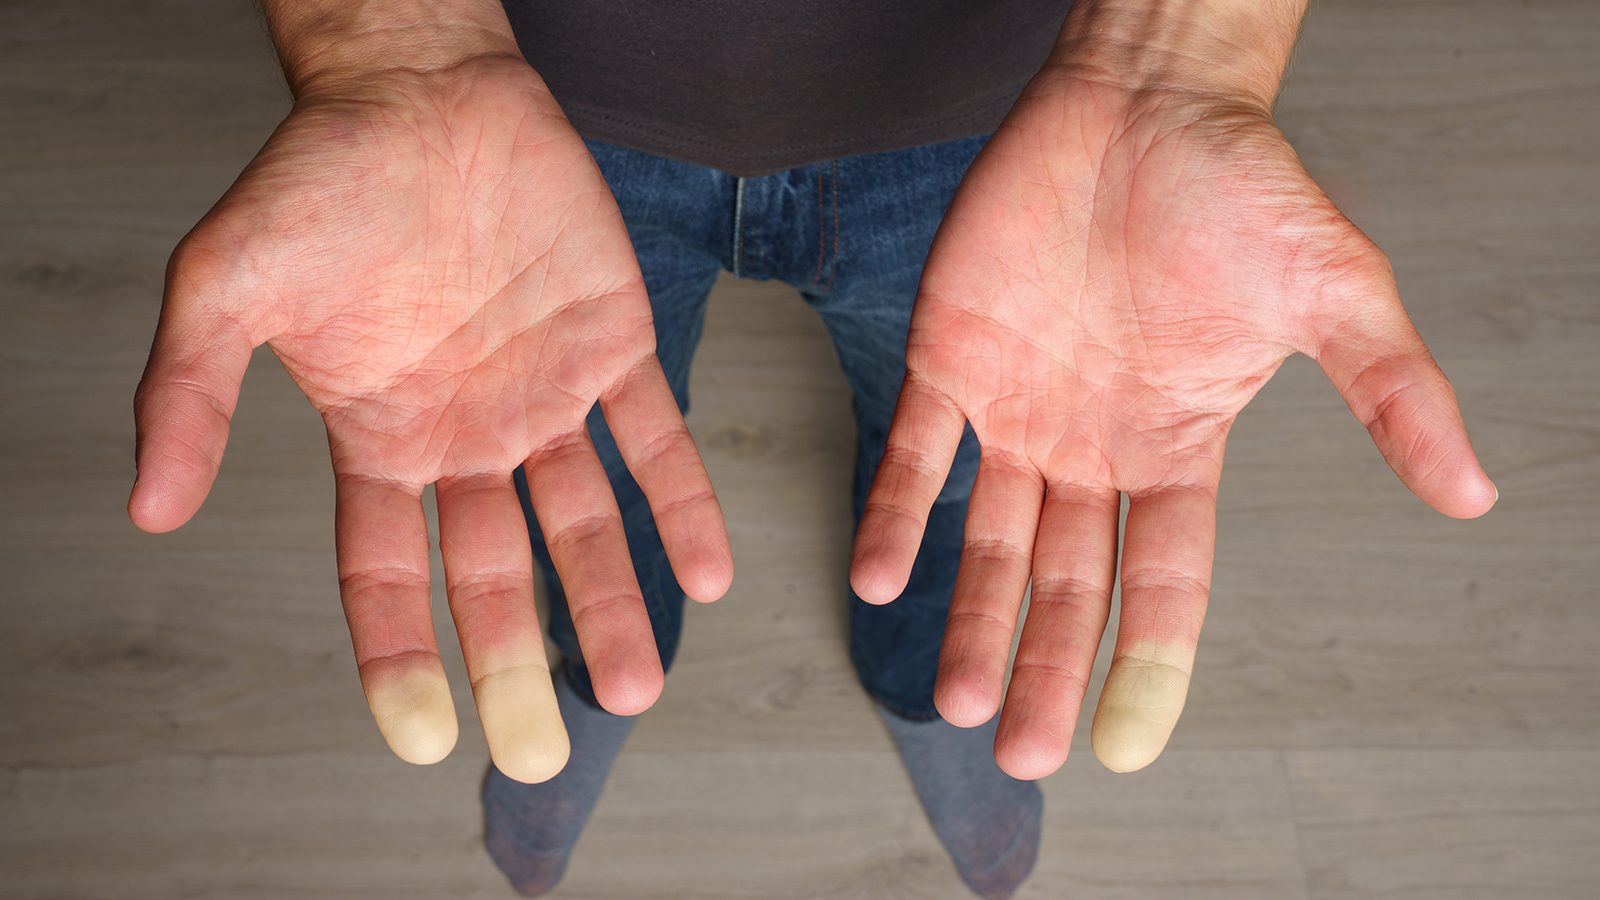 5 Signs of Raynaud’s Disease and How to Manage It